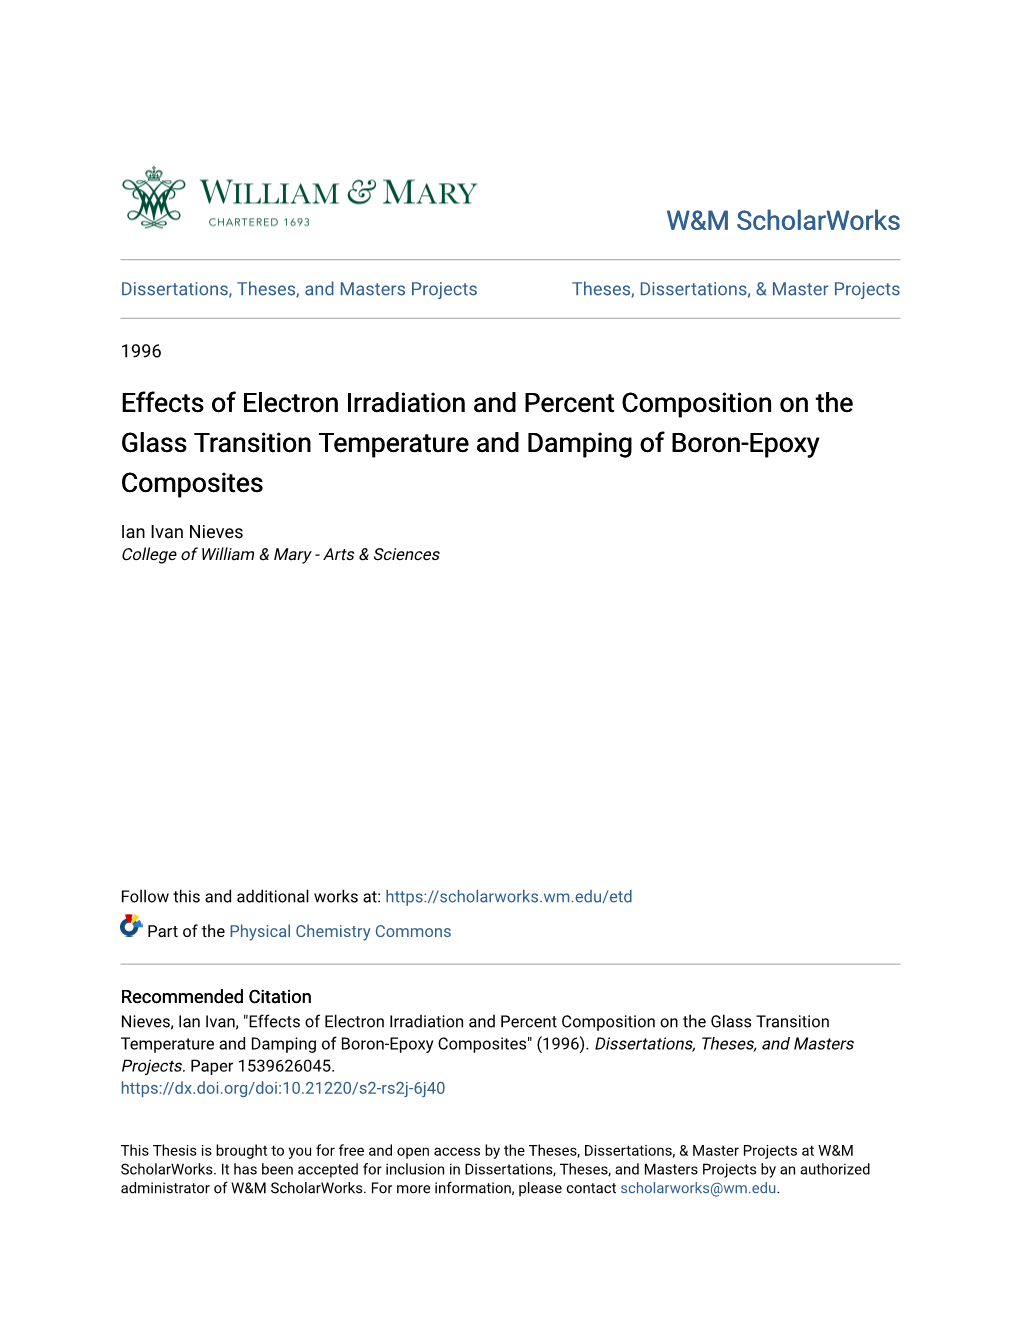 Effects of Electron Irradiation and Percent Composition on the Glass Transition Temperature and Damping of Boron-Epoxy Composites